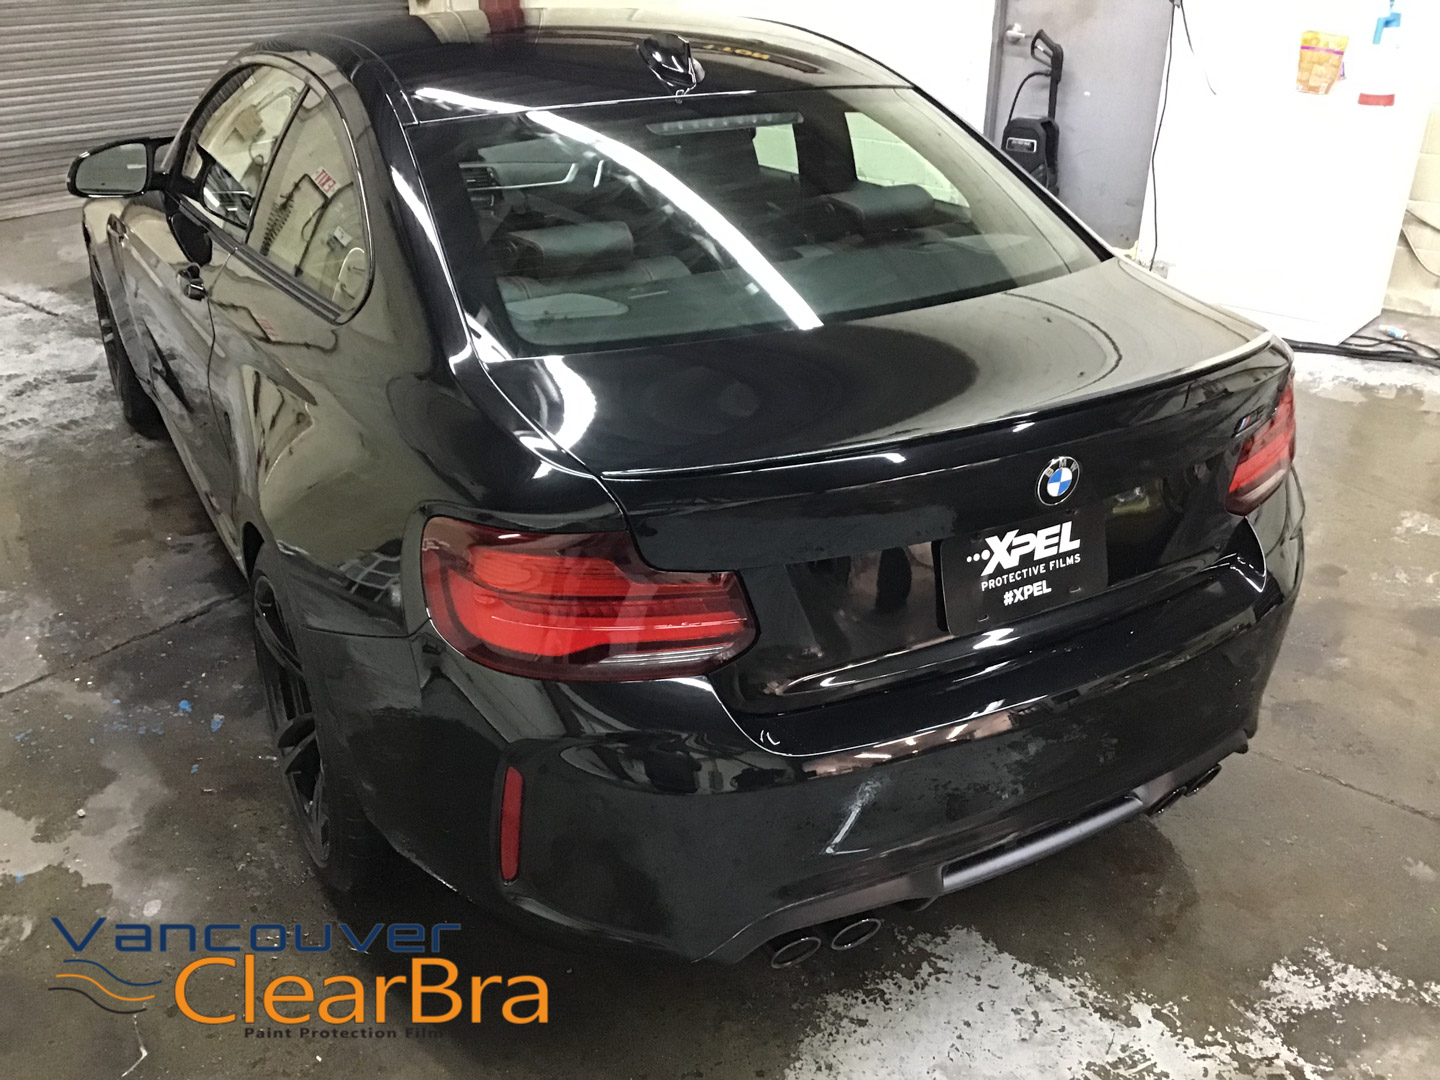 3M SCOTCHGARD PRO PAINT PROTECTION FILM CLEAR BRA FOR 20-22 TOYOTA COROLLA